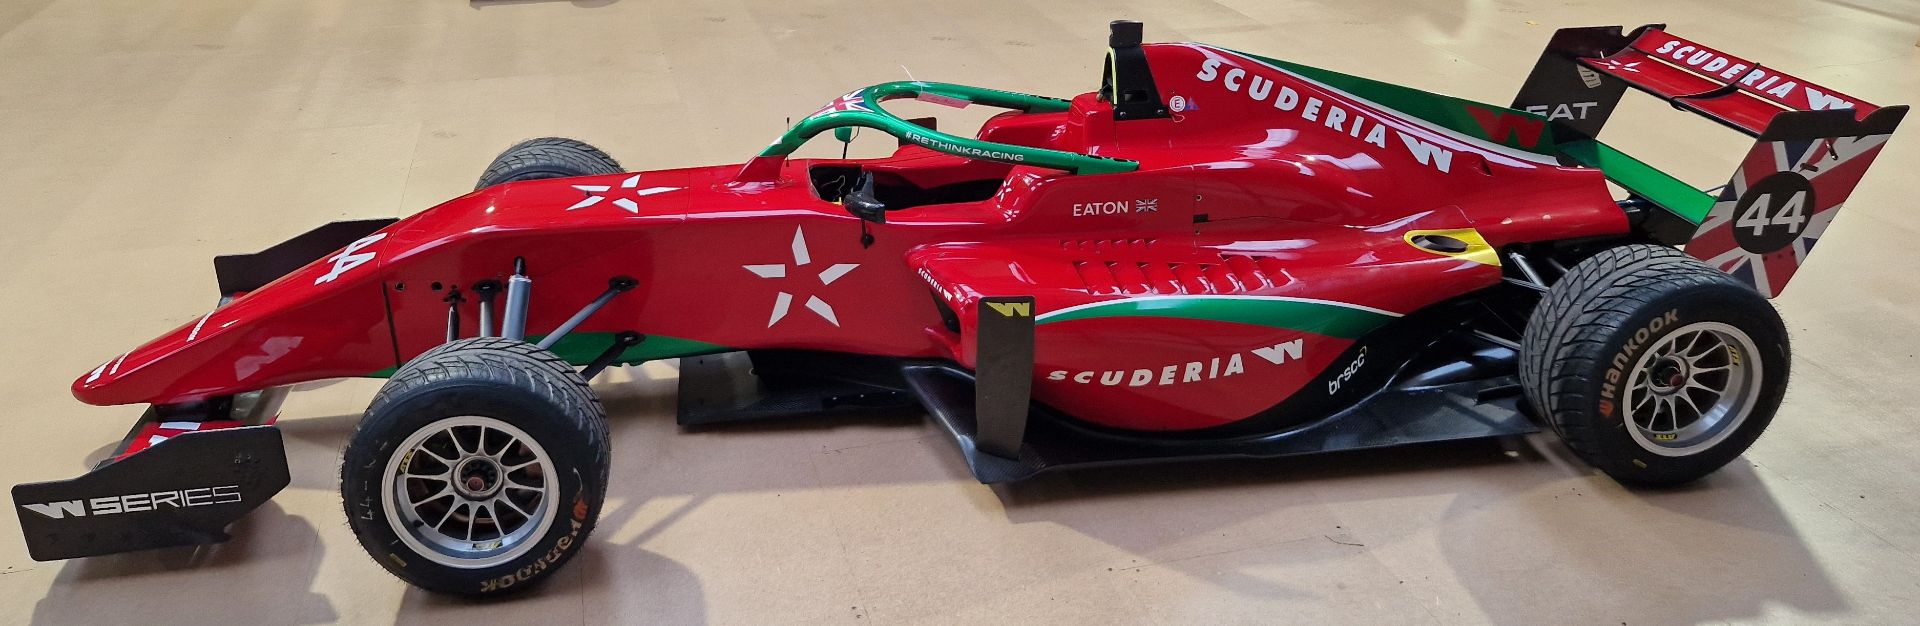 One TATUUS F3 T-318 Alfa Romeo Race Car Chassis No. 037 (2019) Finished in SCUDERIA Livery as Driven - Image 2 of 10